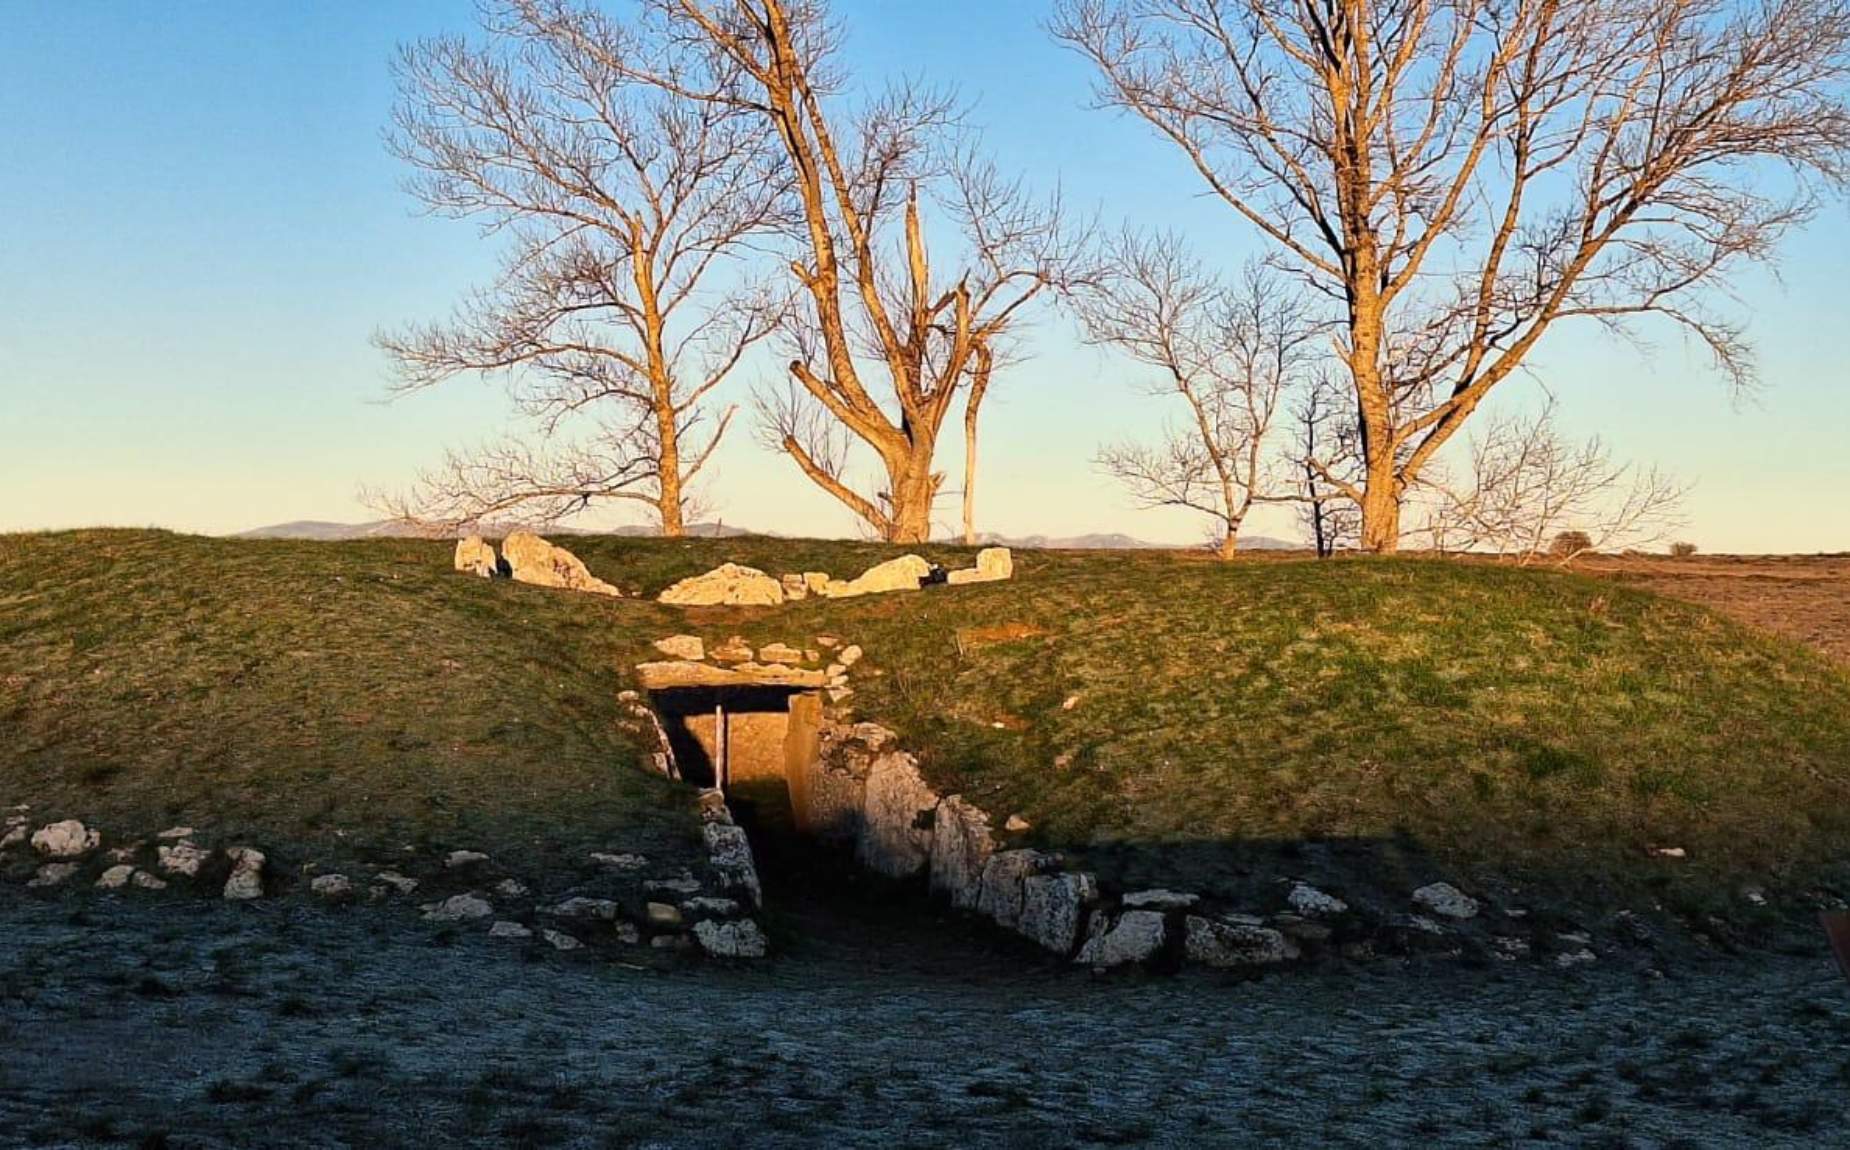 Dolmen in the middle of the park with countryside landscape and trees